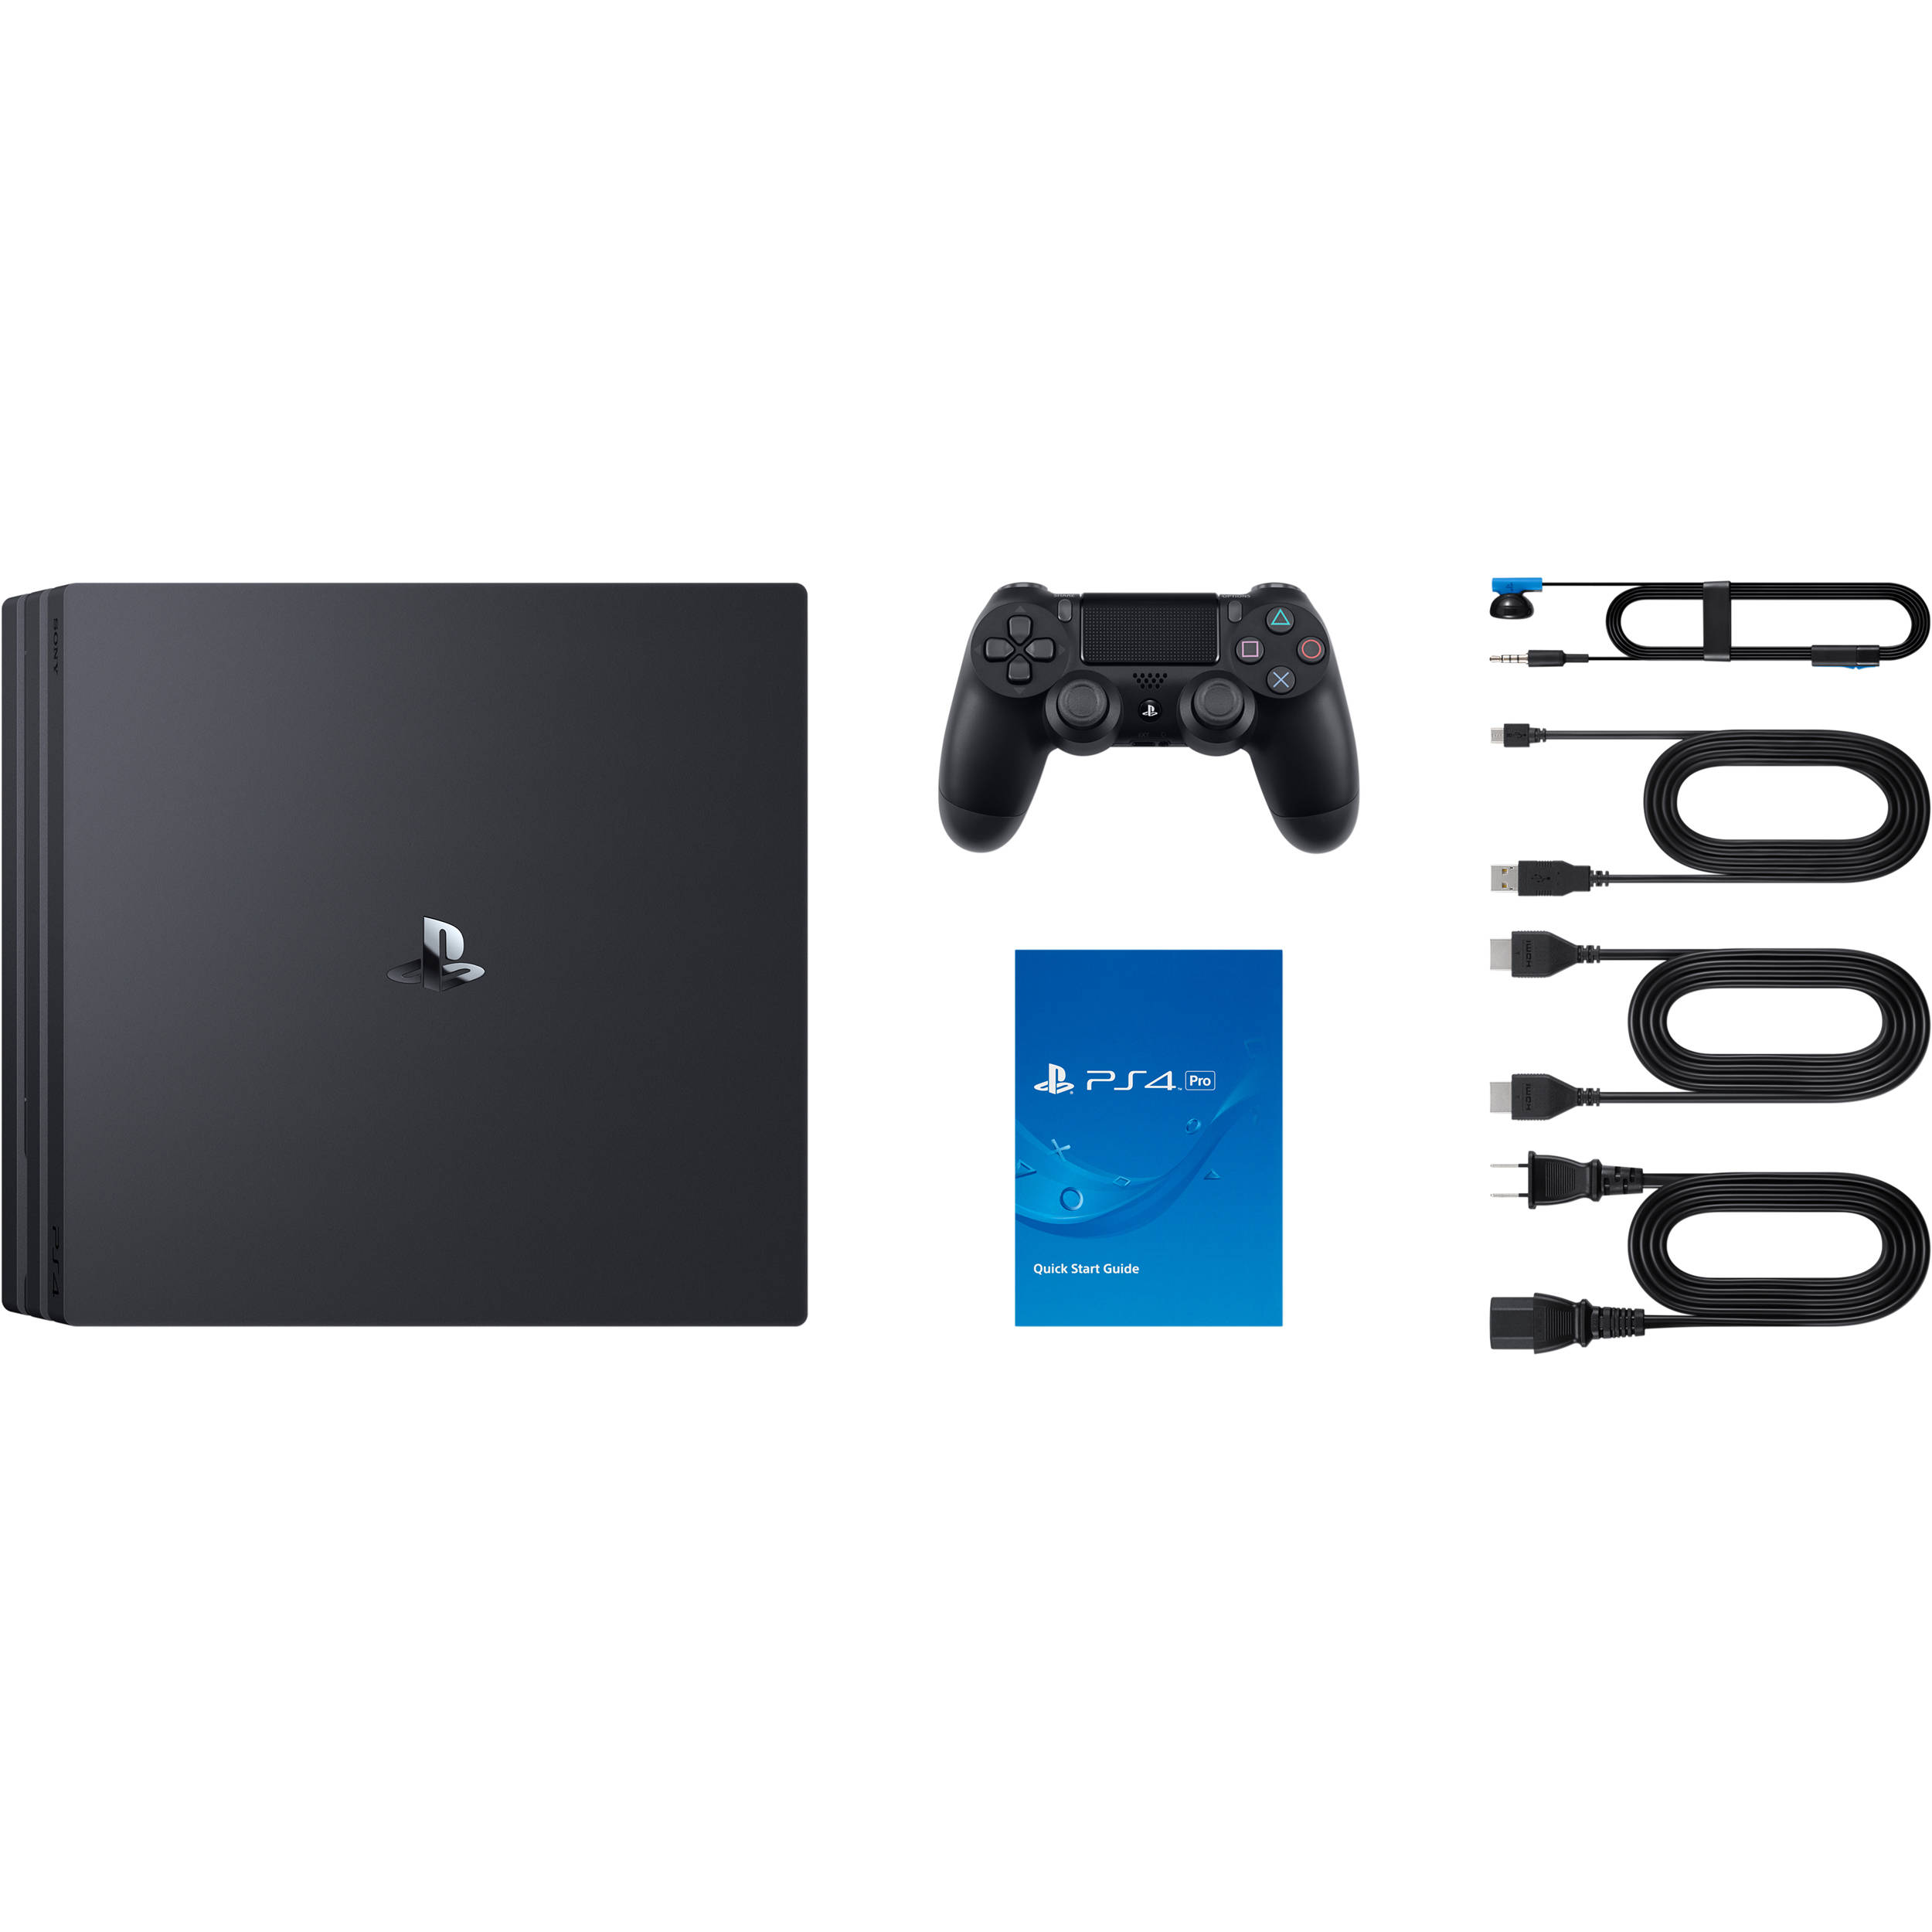 ps4 pro gaming console